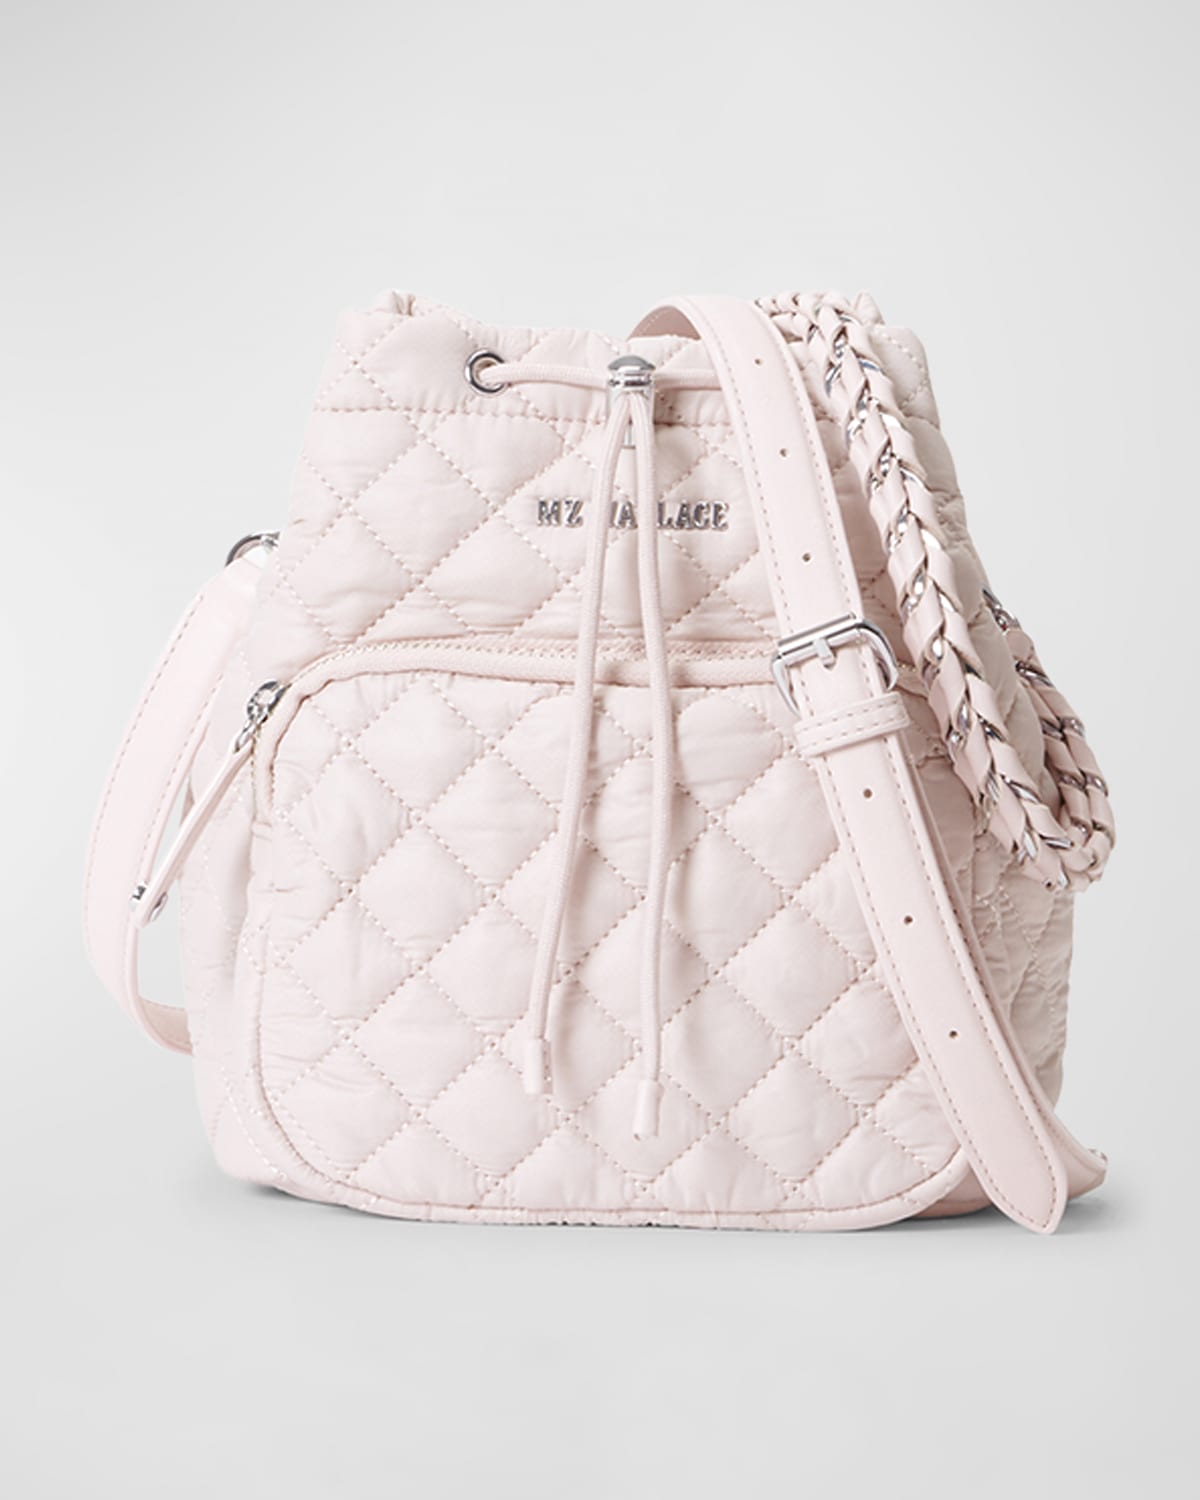 Crosby Quilted Leather Hobo Bag